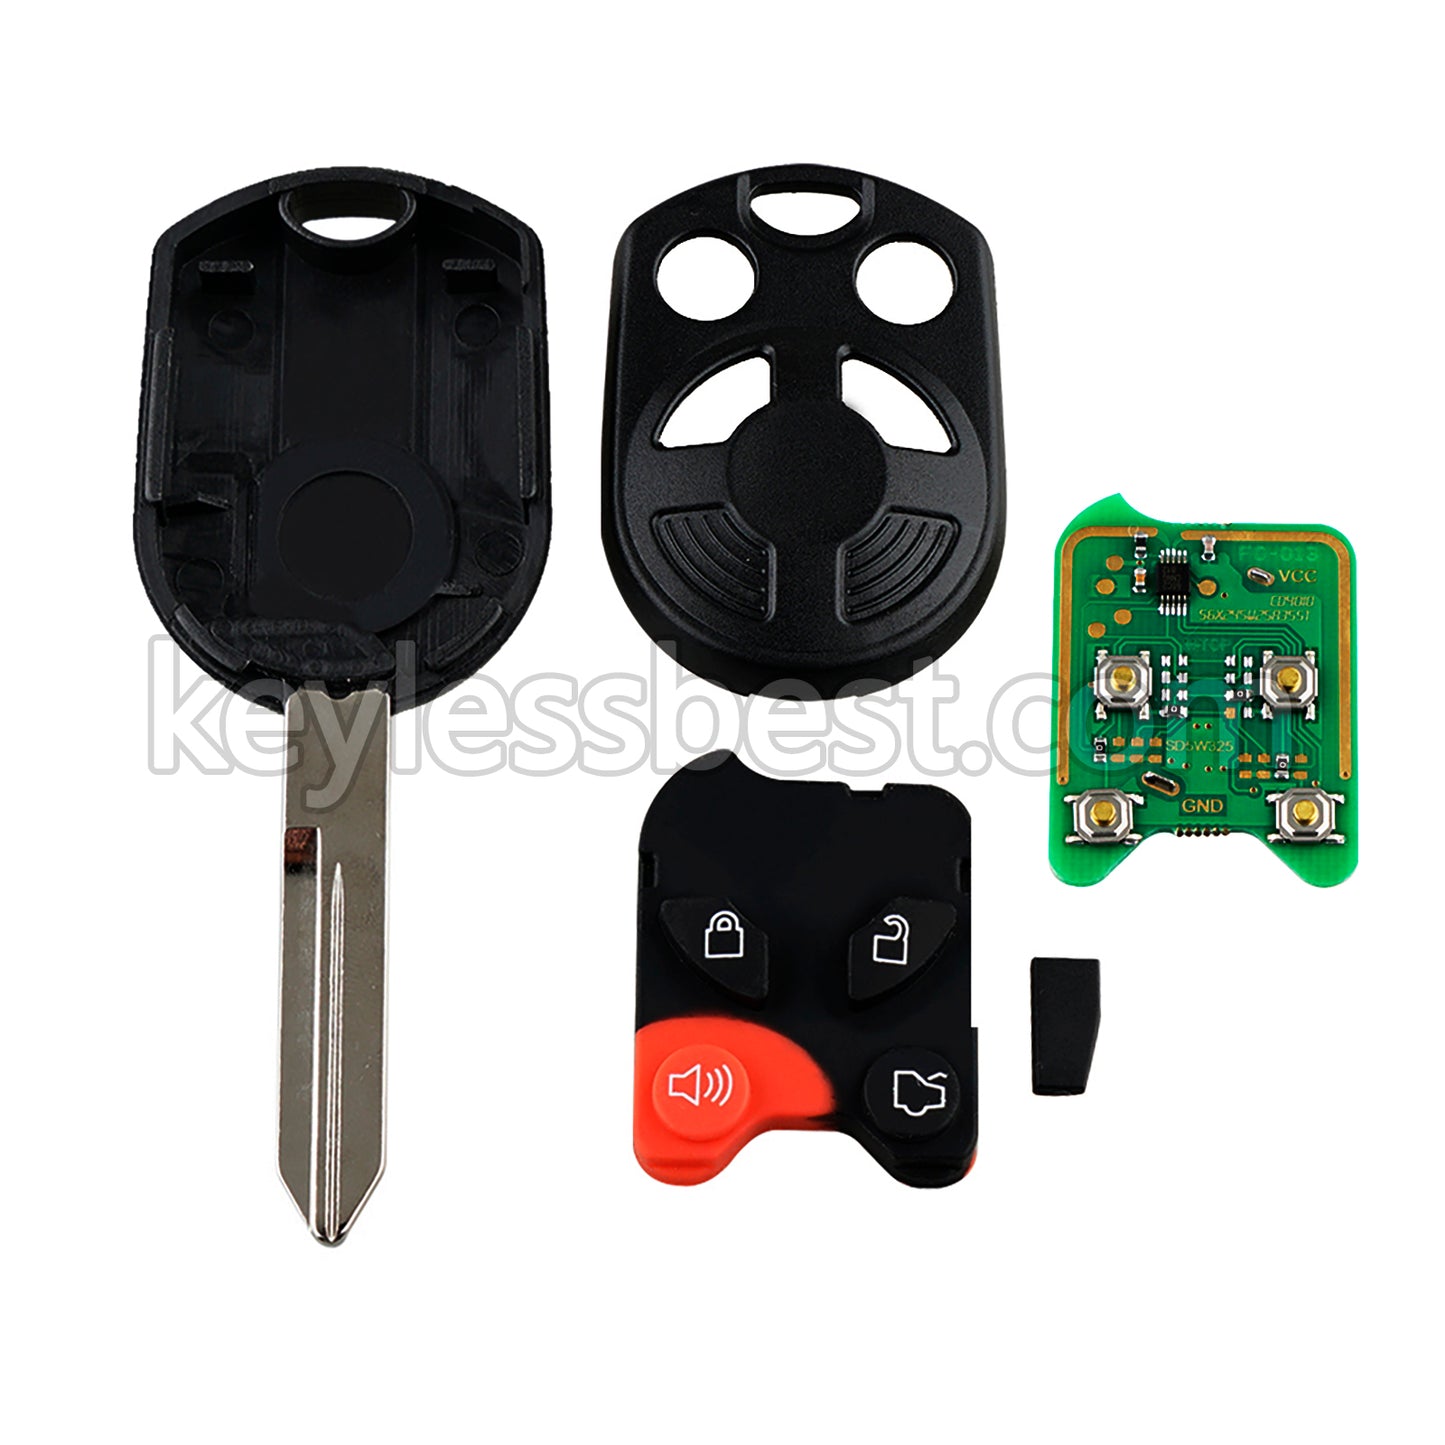 2005-2012 Ford Lincoln Mazda Mercury / 4 Button Remote Key / OUCD6000022 / 315MHz